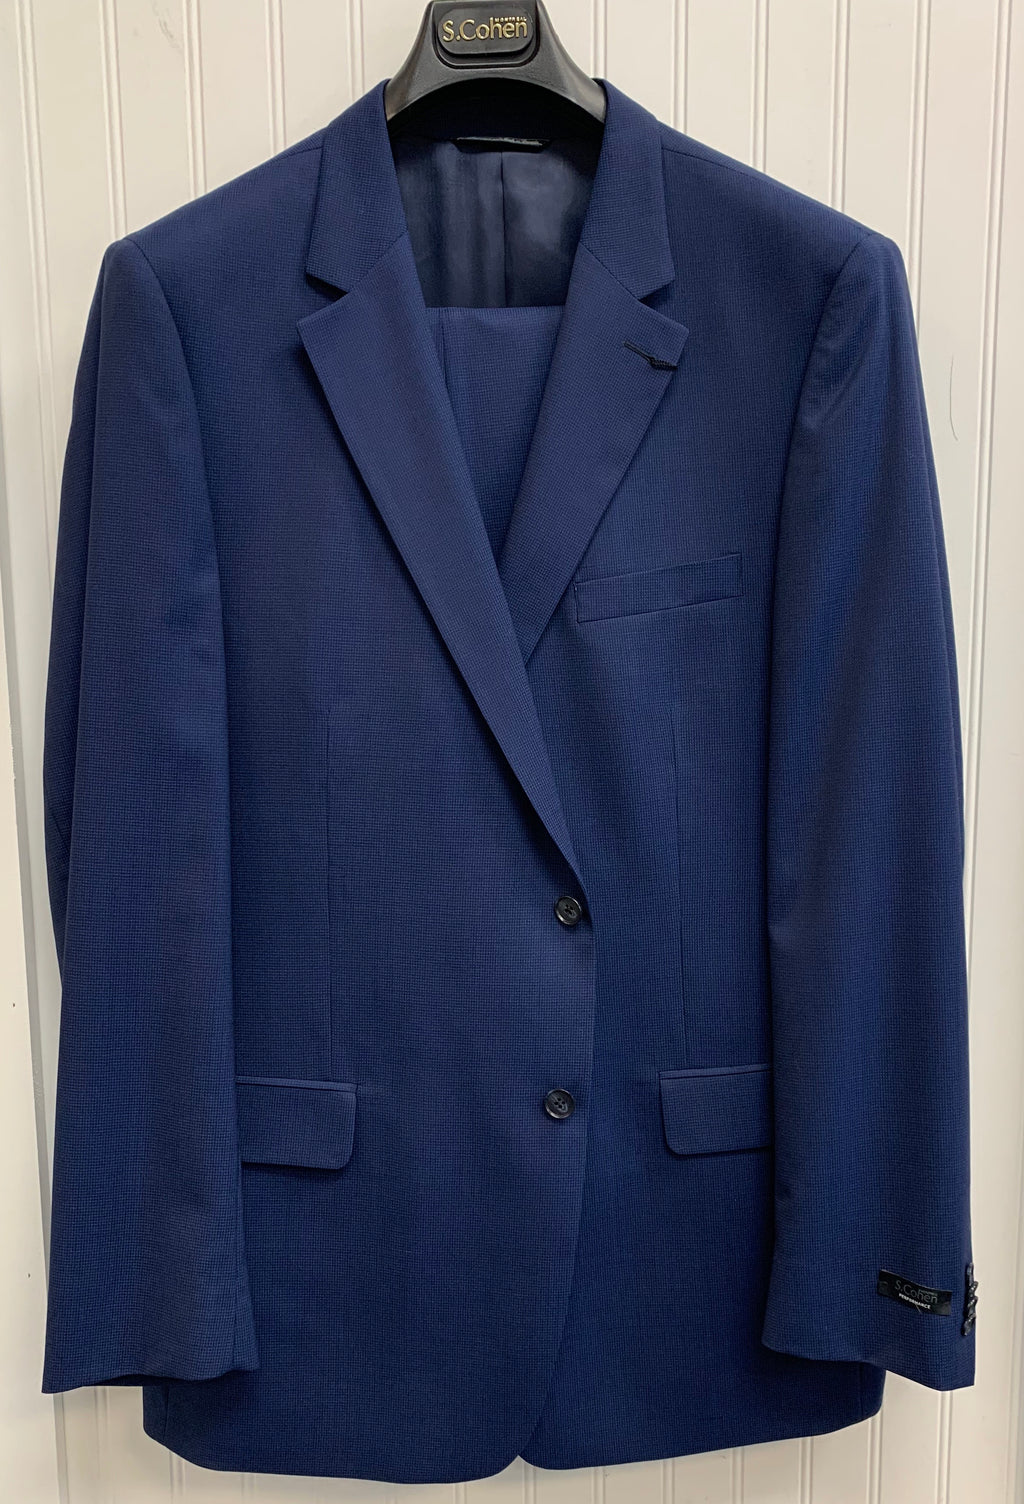 S. Cohen Performance Wool Suit- 89-1663 (Navy Microcheck)